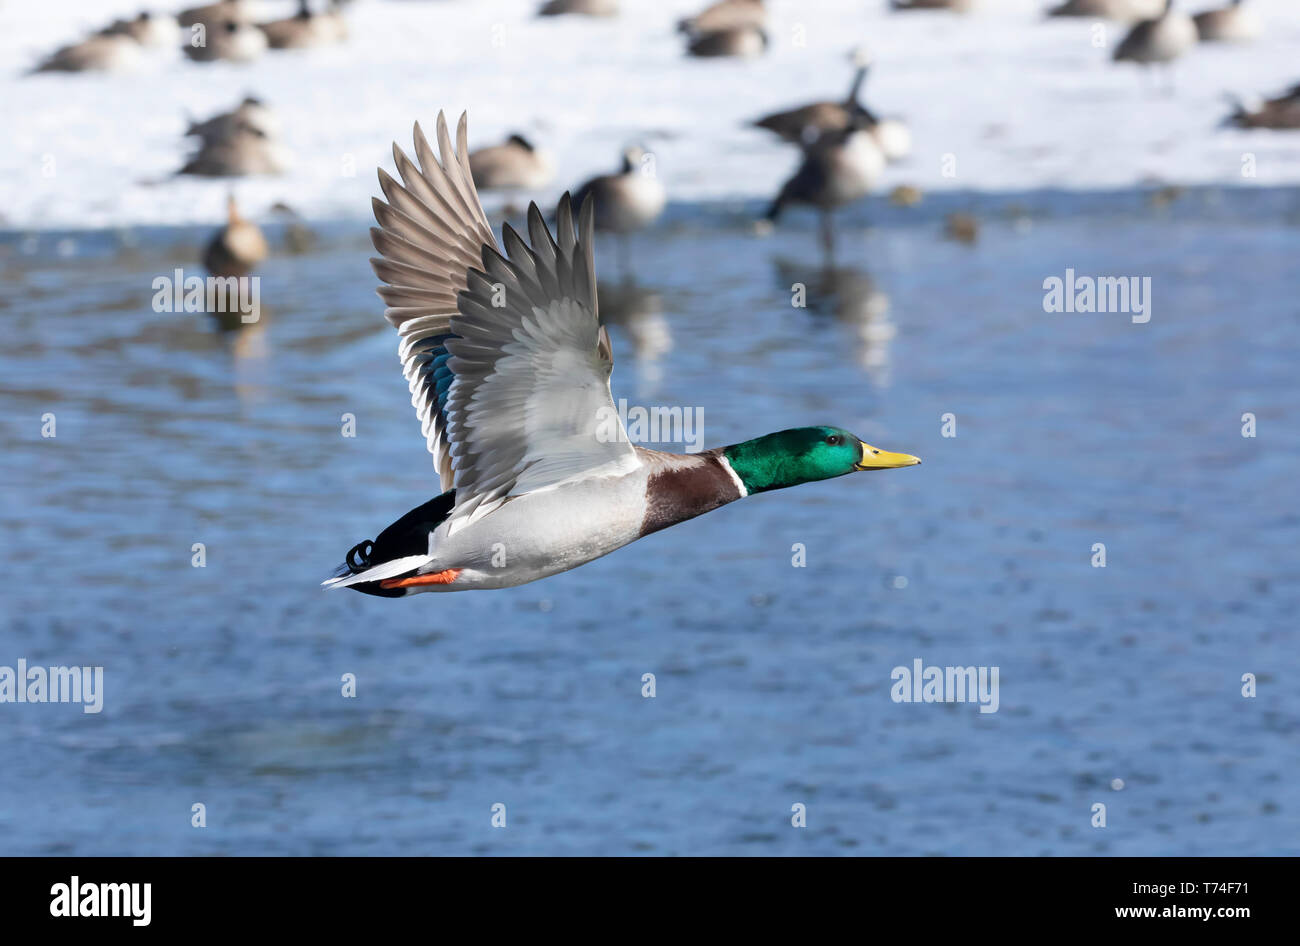 Male Mallard duck (Anas platyrhynchos) in flight over water with other birds by the snowy shoreline; Fort Collins, Colorado, United States of America Stock Photo